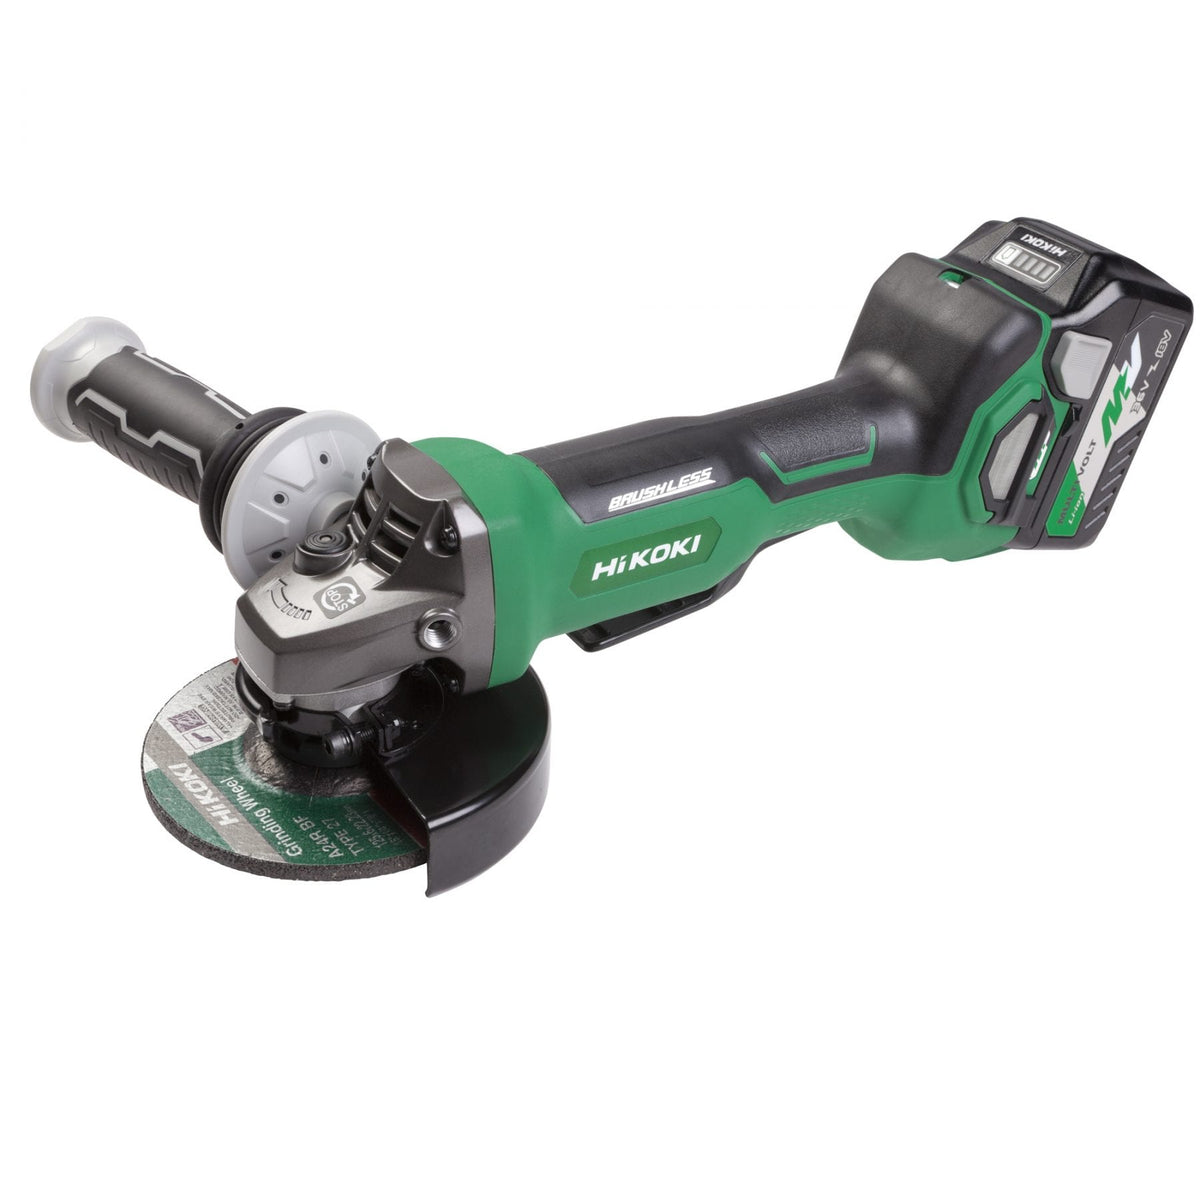 Hikoki 36v 125mm Angle Grinder Kit - G3613DBGRZ.  Angled view of disc grinder with battery fitted.